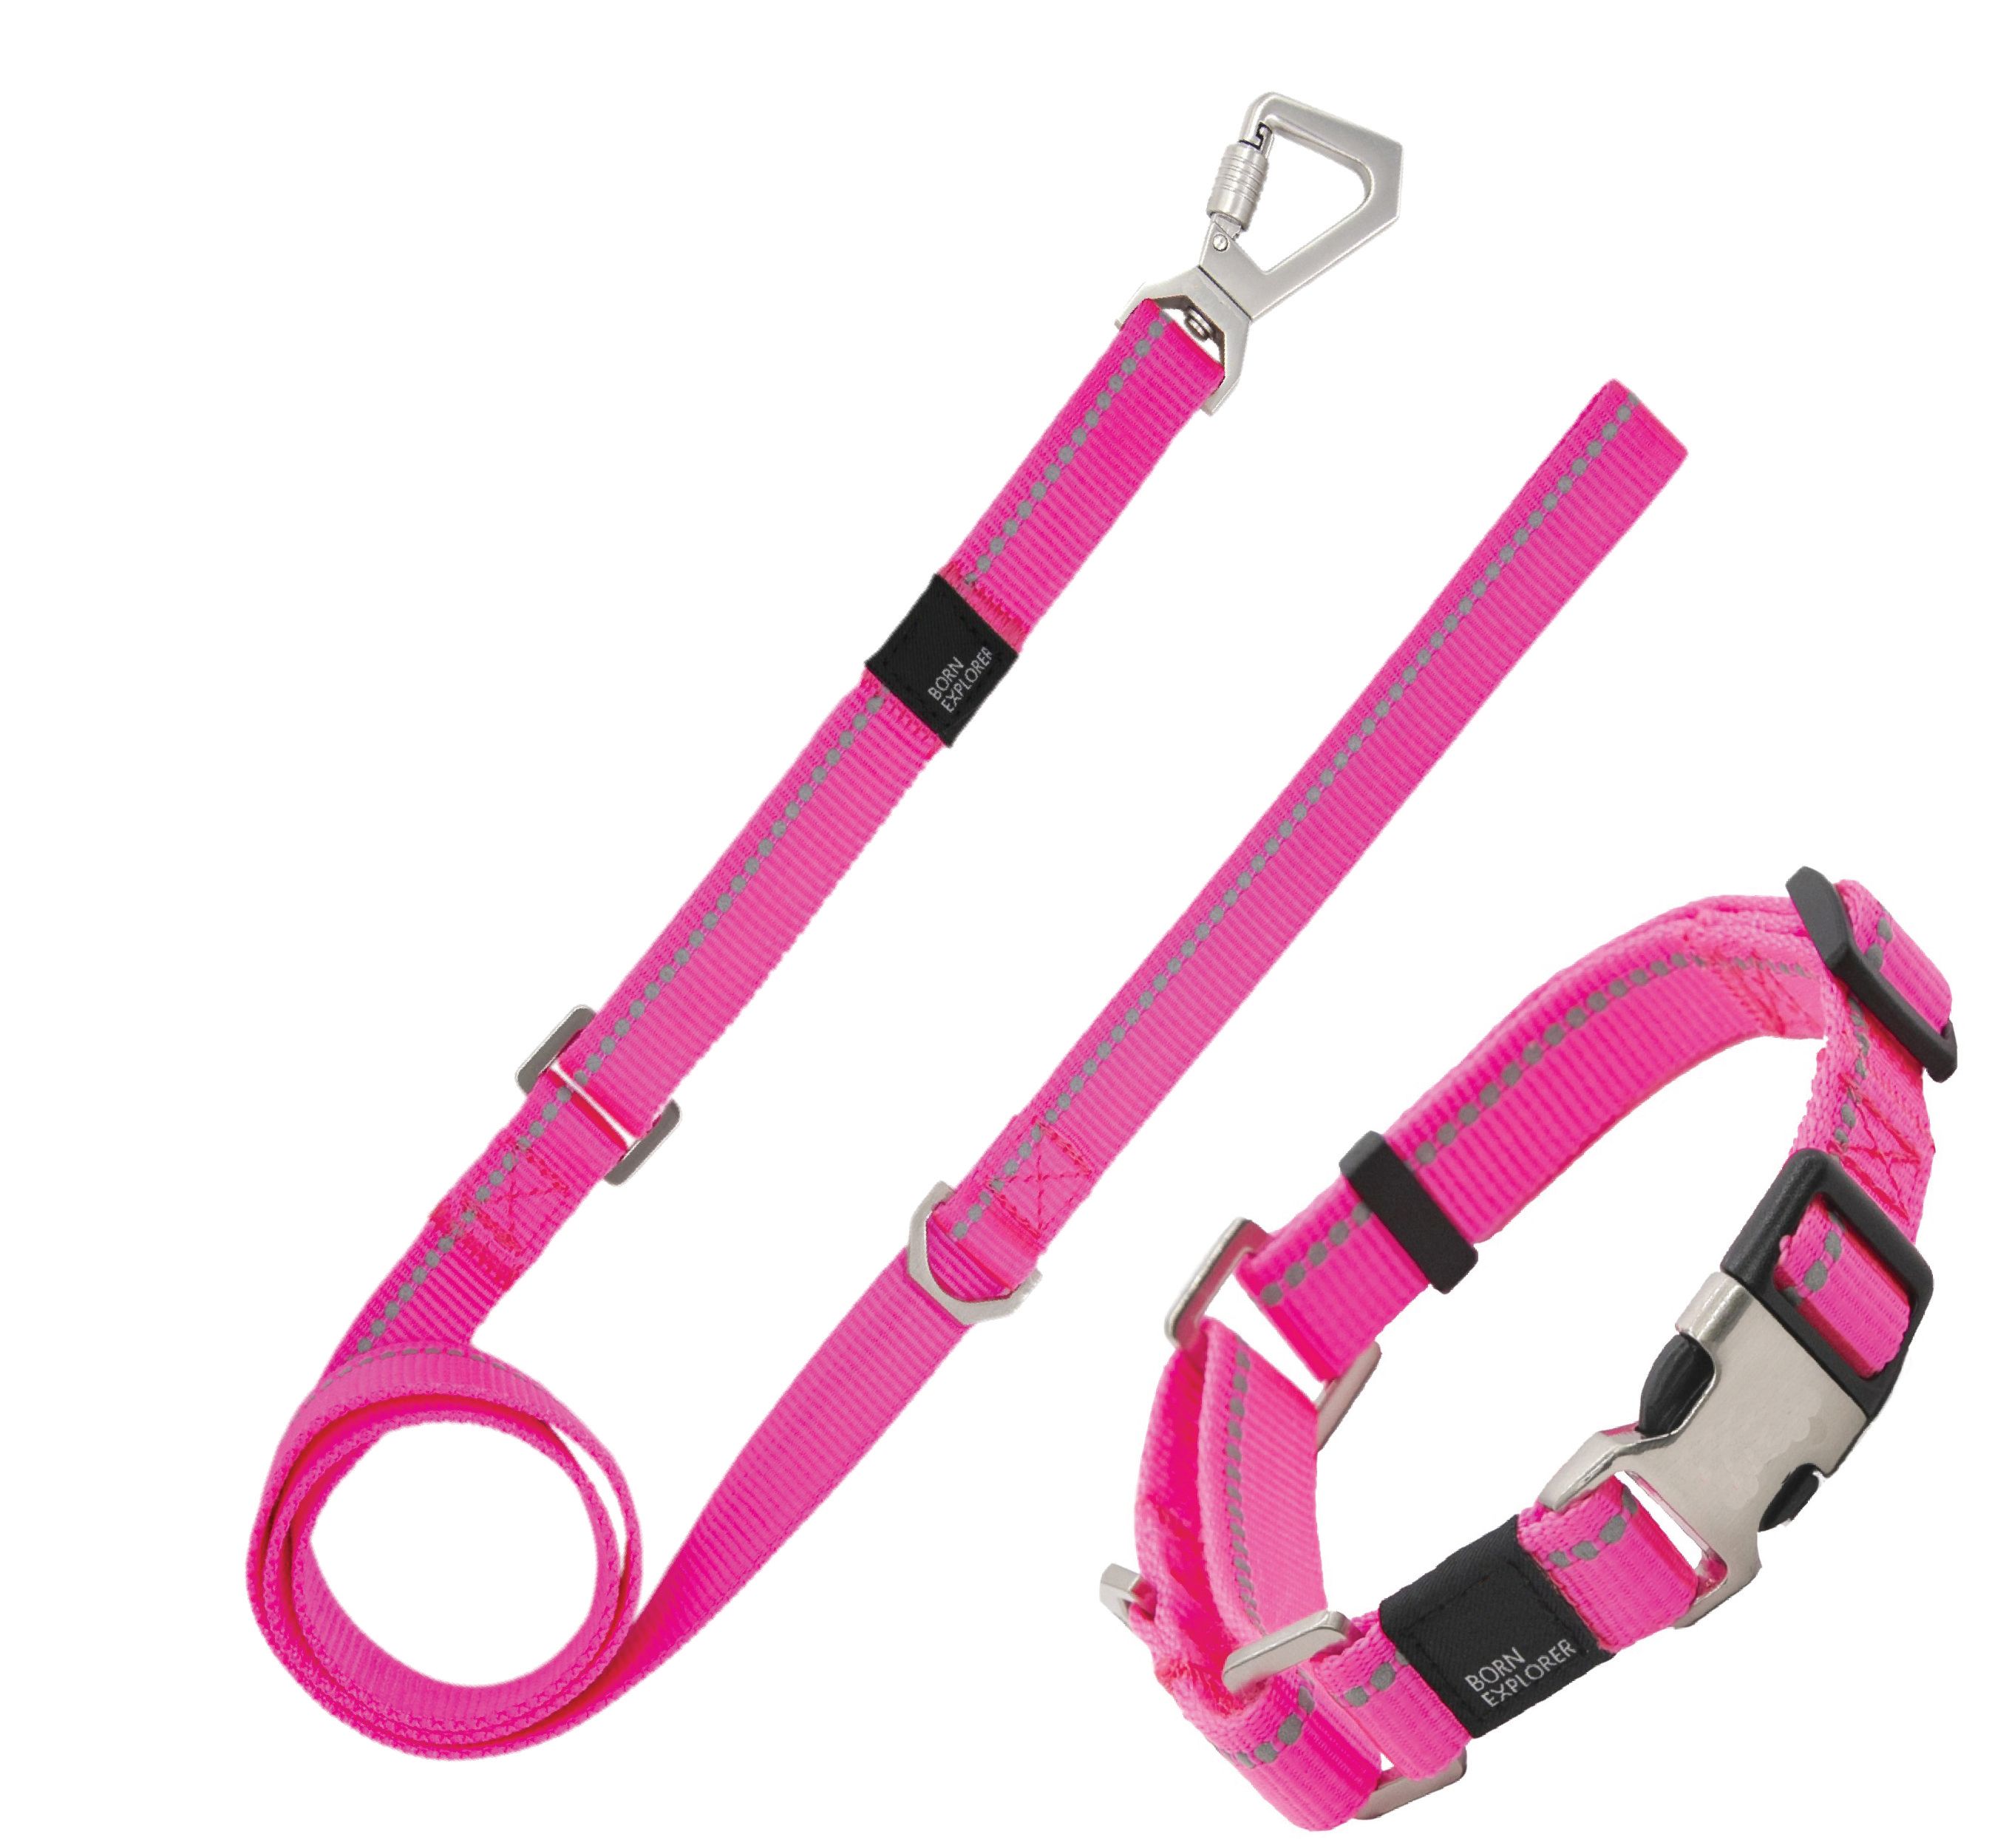 Pet Life ® 'Advent' Outdoor Series 3M Reflective 2-in-1 Durable Martingale Training Dog Leash and Collar Pink Small